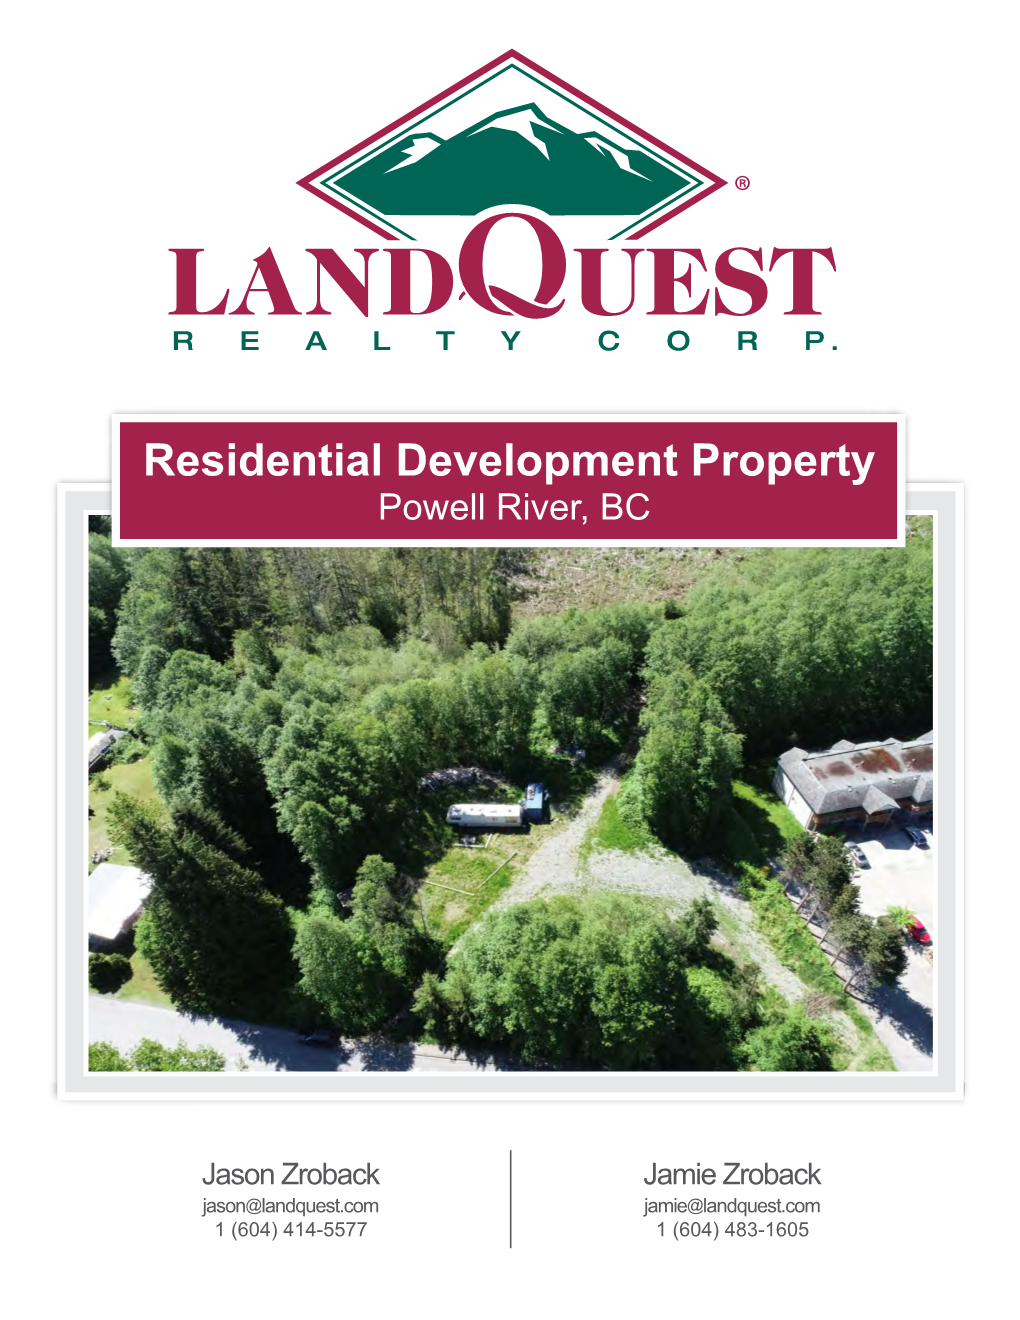 Residential Development Property Powell River, BC